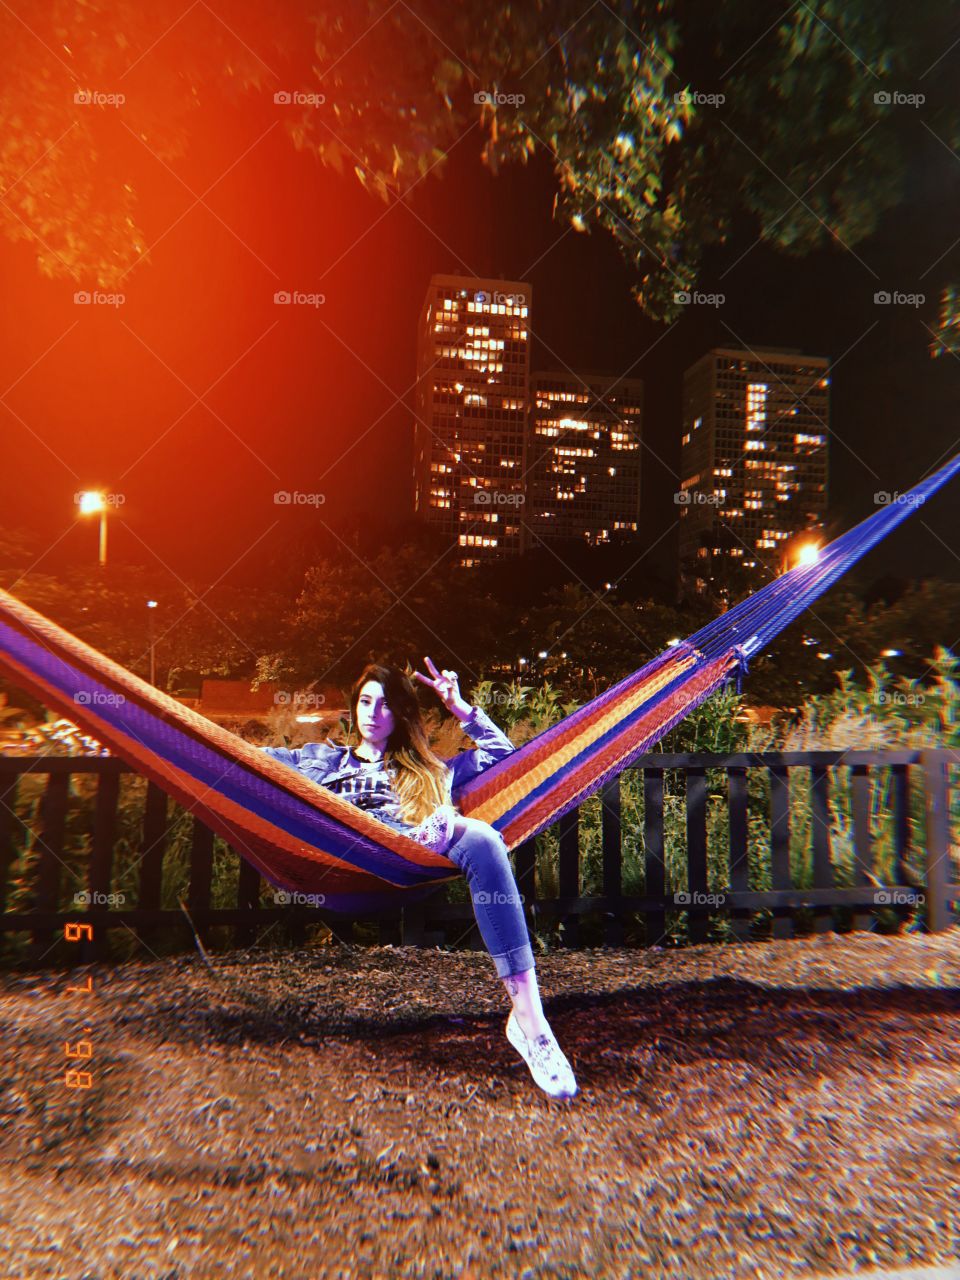 Hammock chilling in the city.